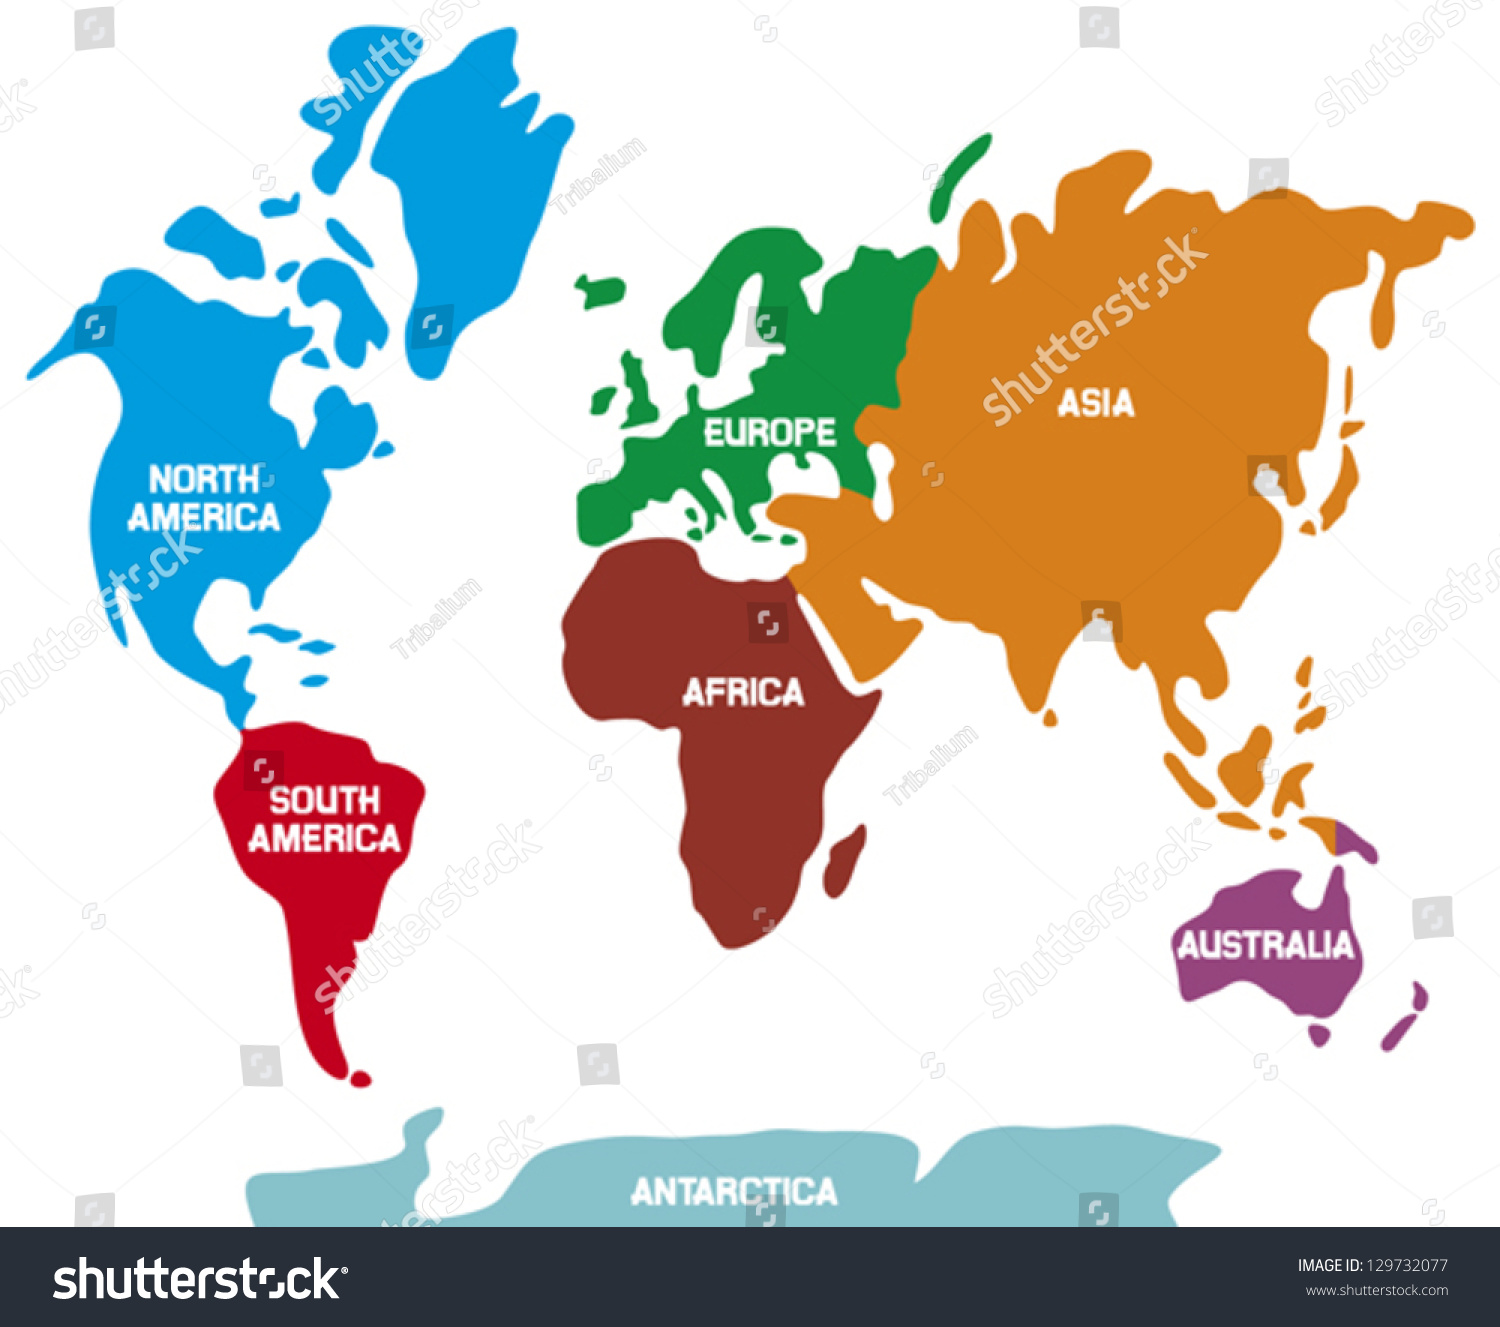 Picture Of World Map With Continents And Oceans Labeled - United States Map